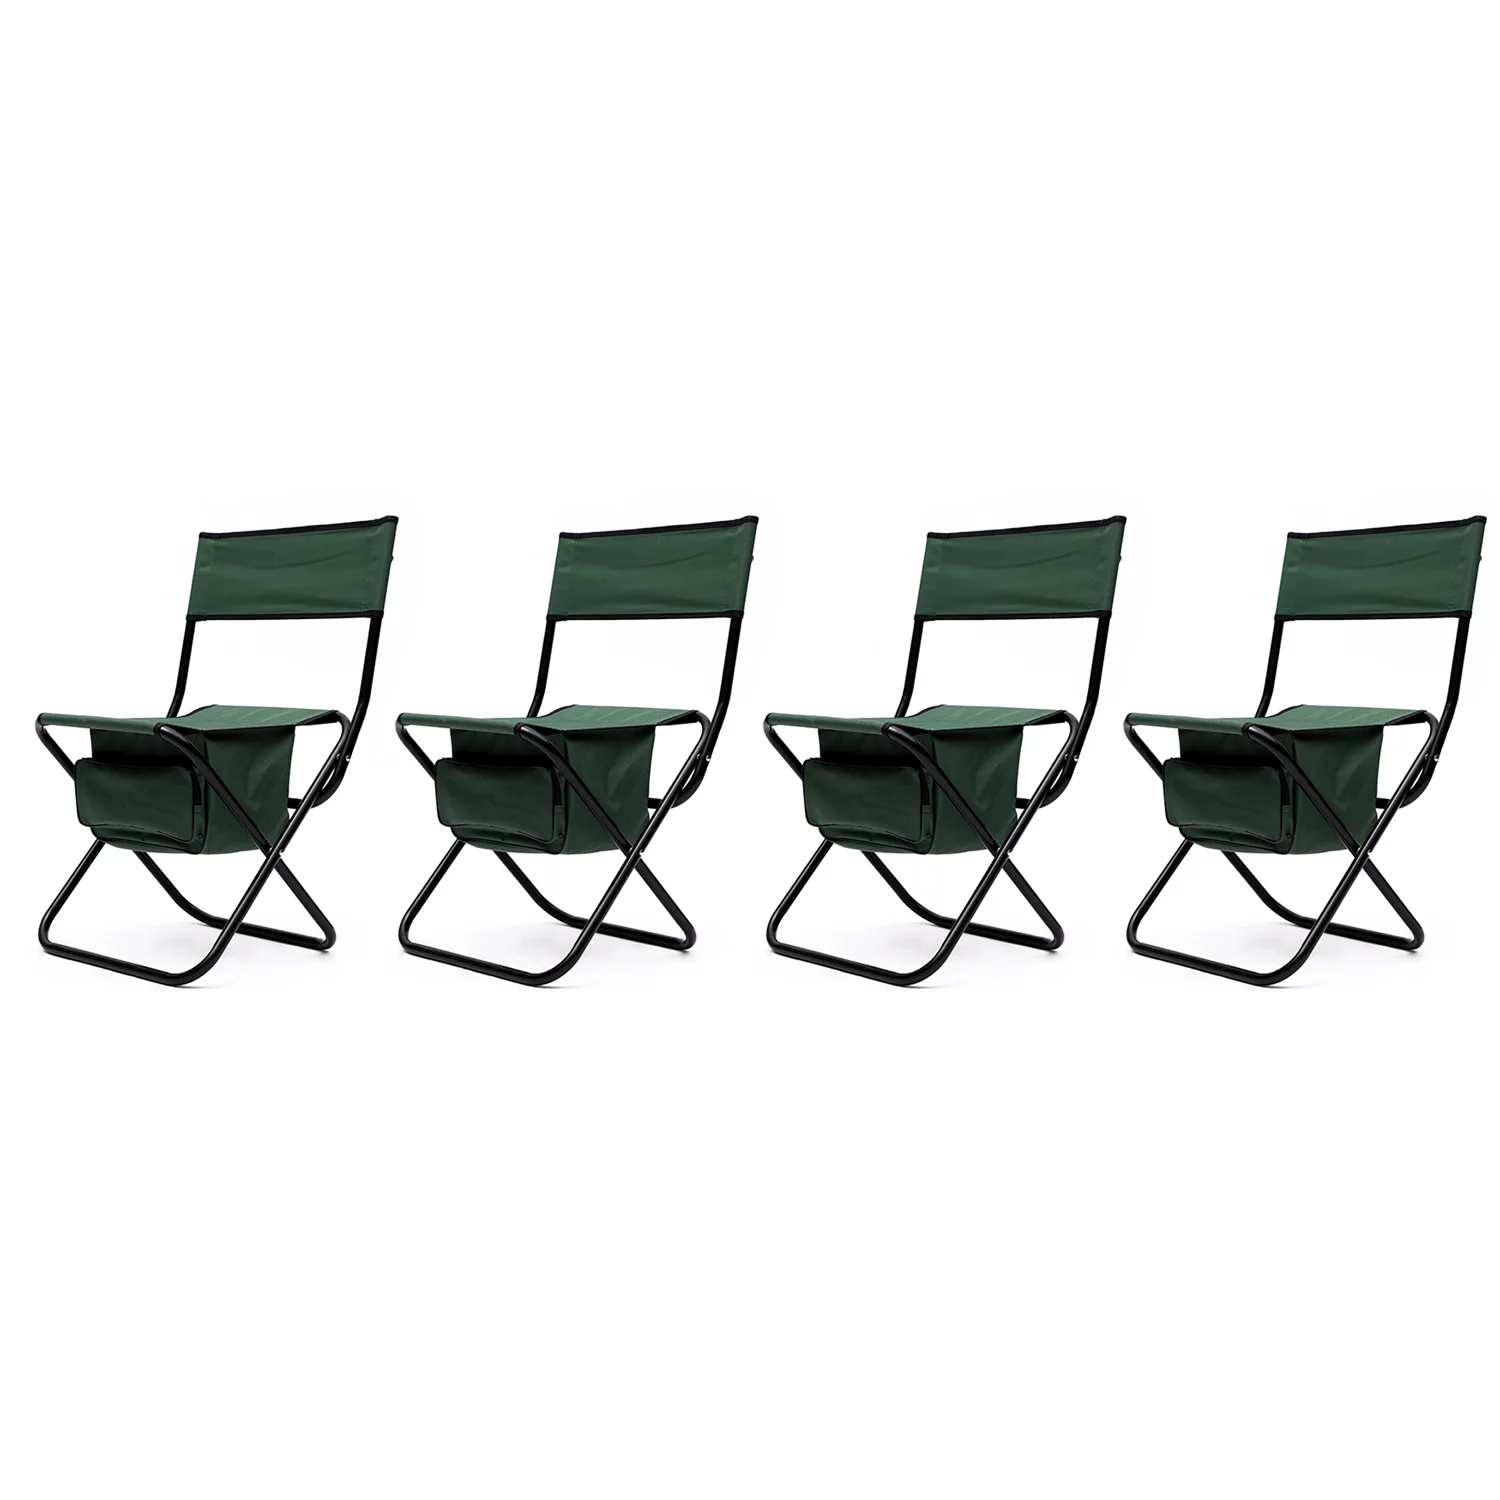 Folding Outdoor Chair with Storage Bag,Fishing Chair Compact Fishing Stool  Foldable Camping Chair,Green 4Pack - Rirool